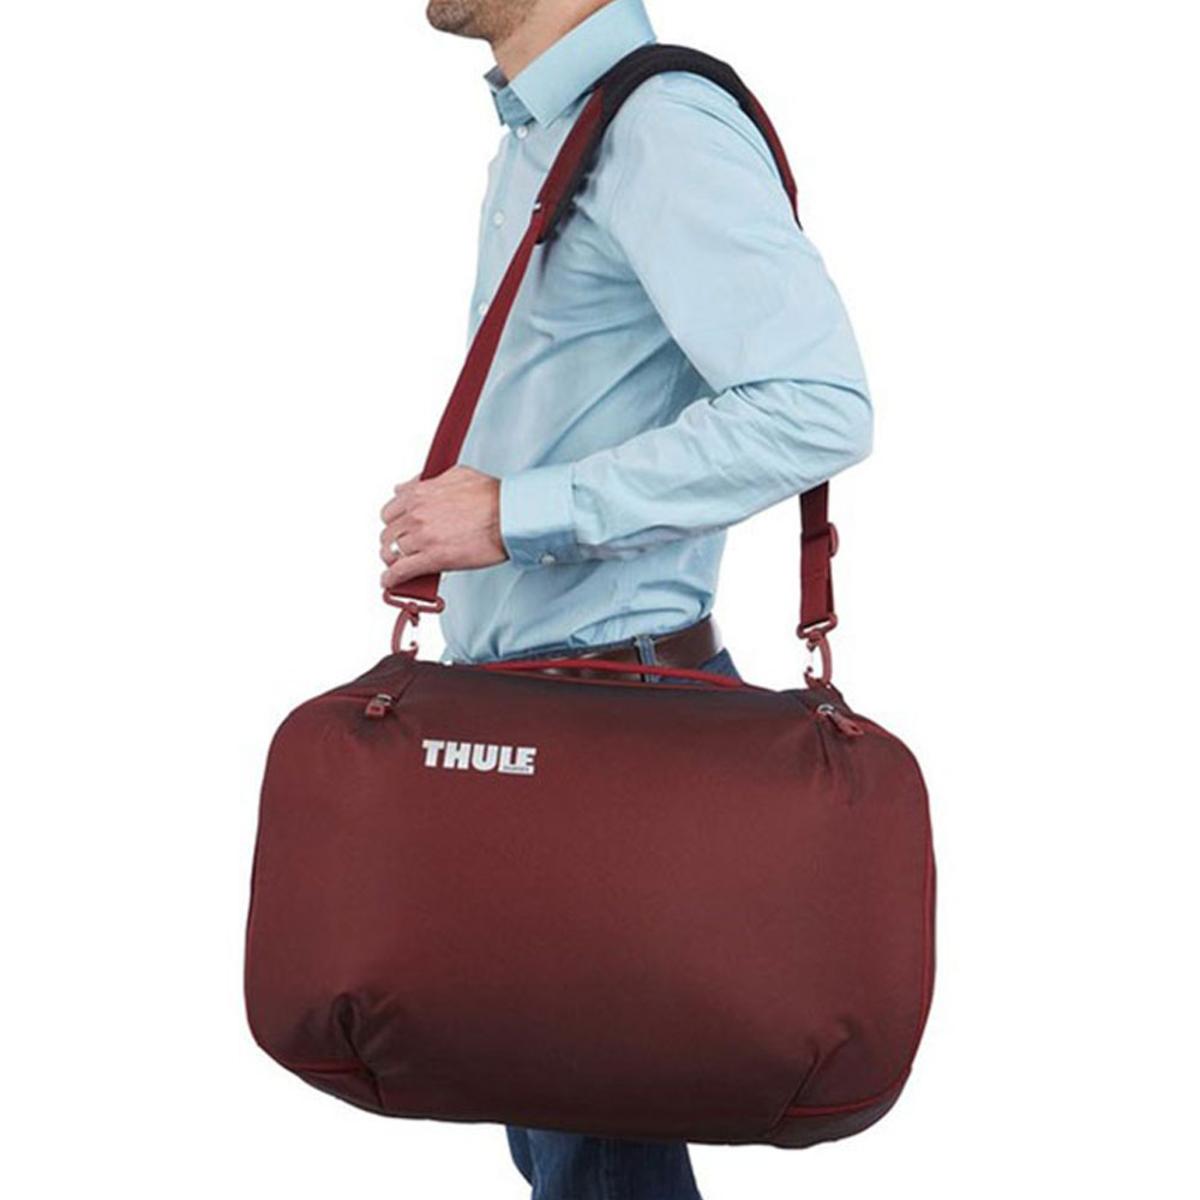 Thule Subterra Carry-On 40L - Ember